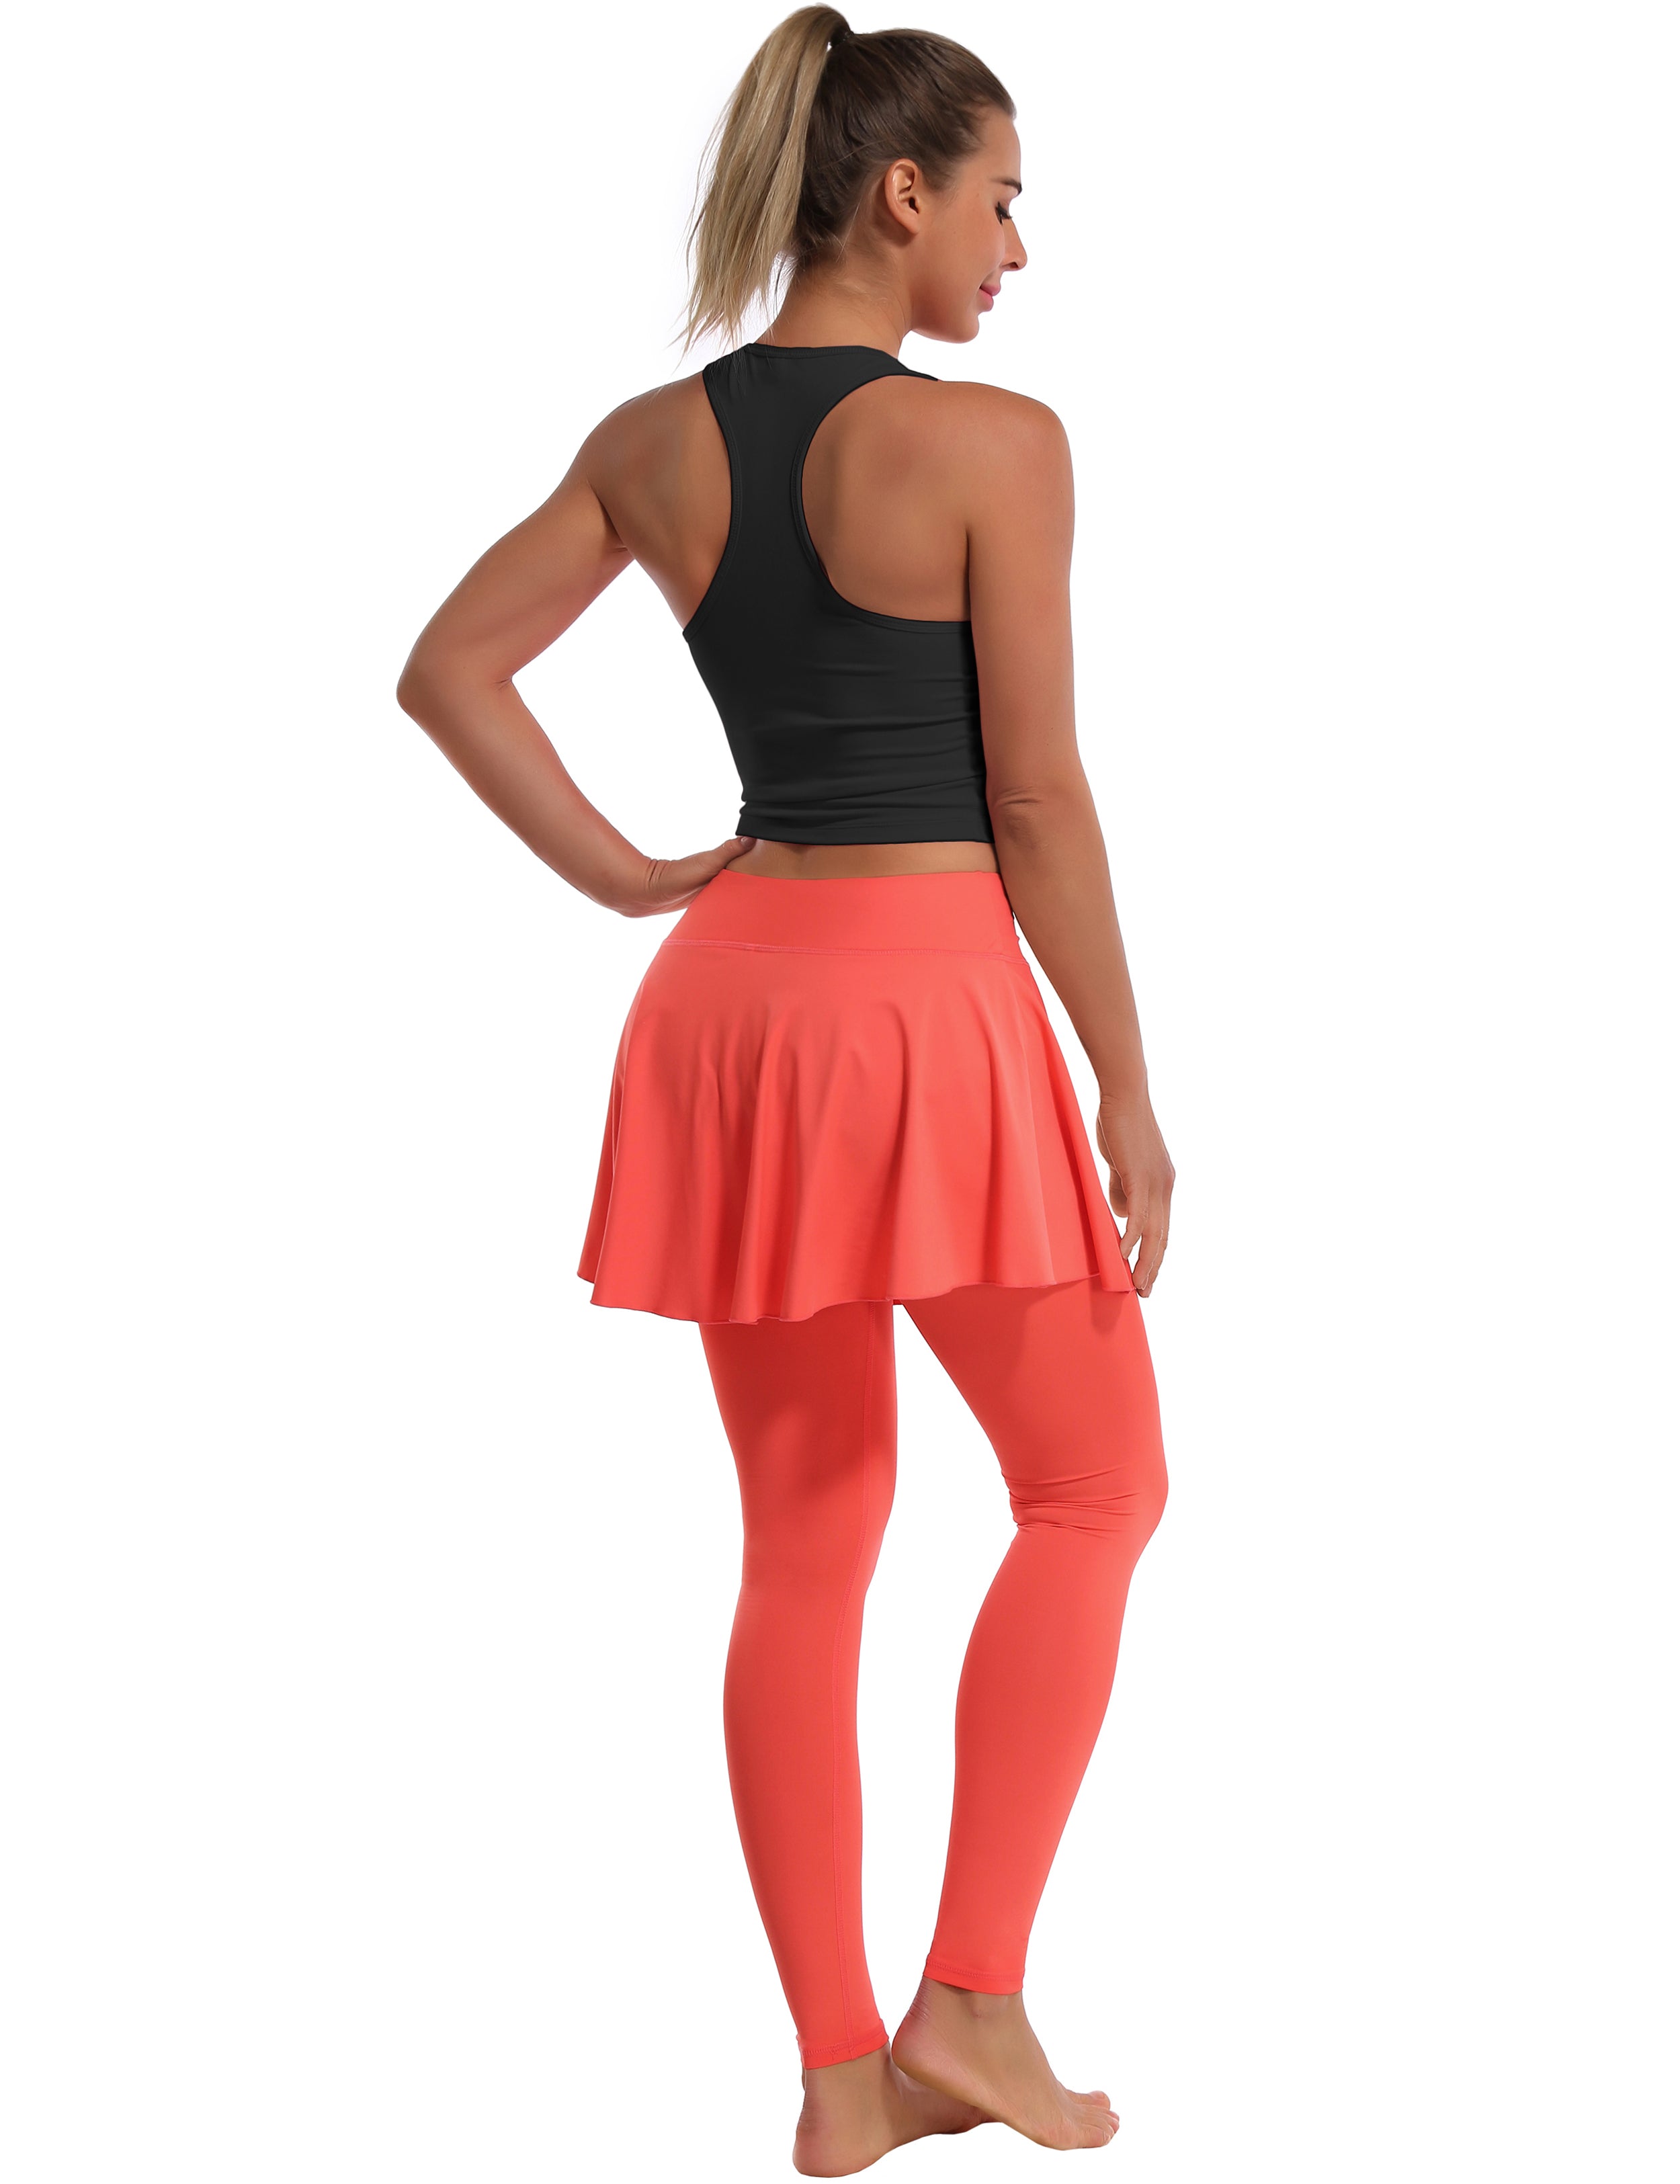 Athletic Tennis Golf Skort with Pocket Shorts coral 80%Nylon/20%Spandex UPF 50+ sun protection Elastic closure Lightweight, Wrinkle Moisture wicking Quick drying Secure & comfortable two layer Hidden pocket